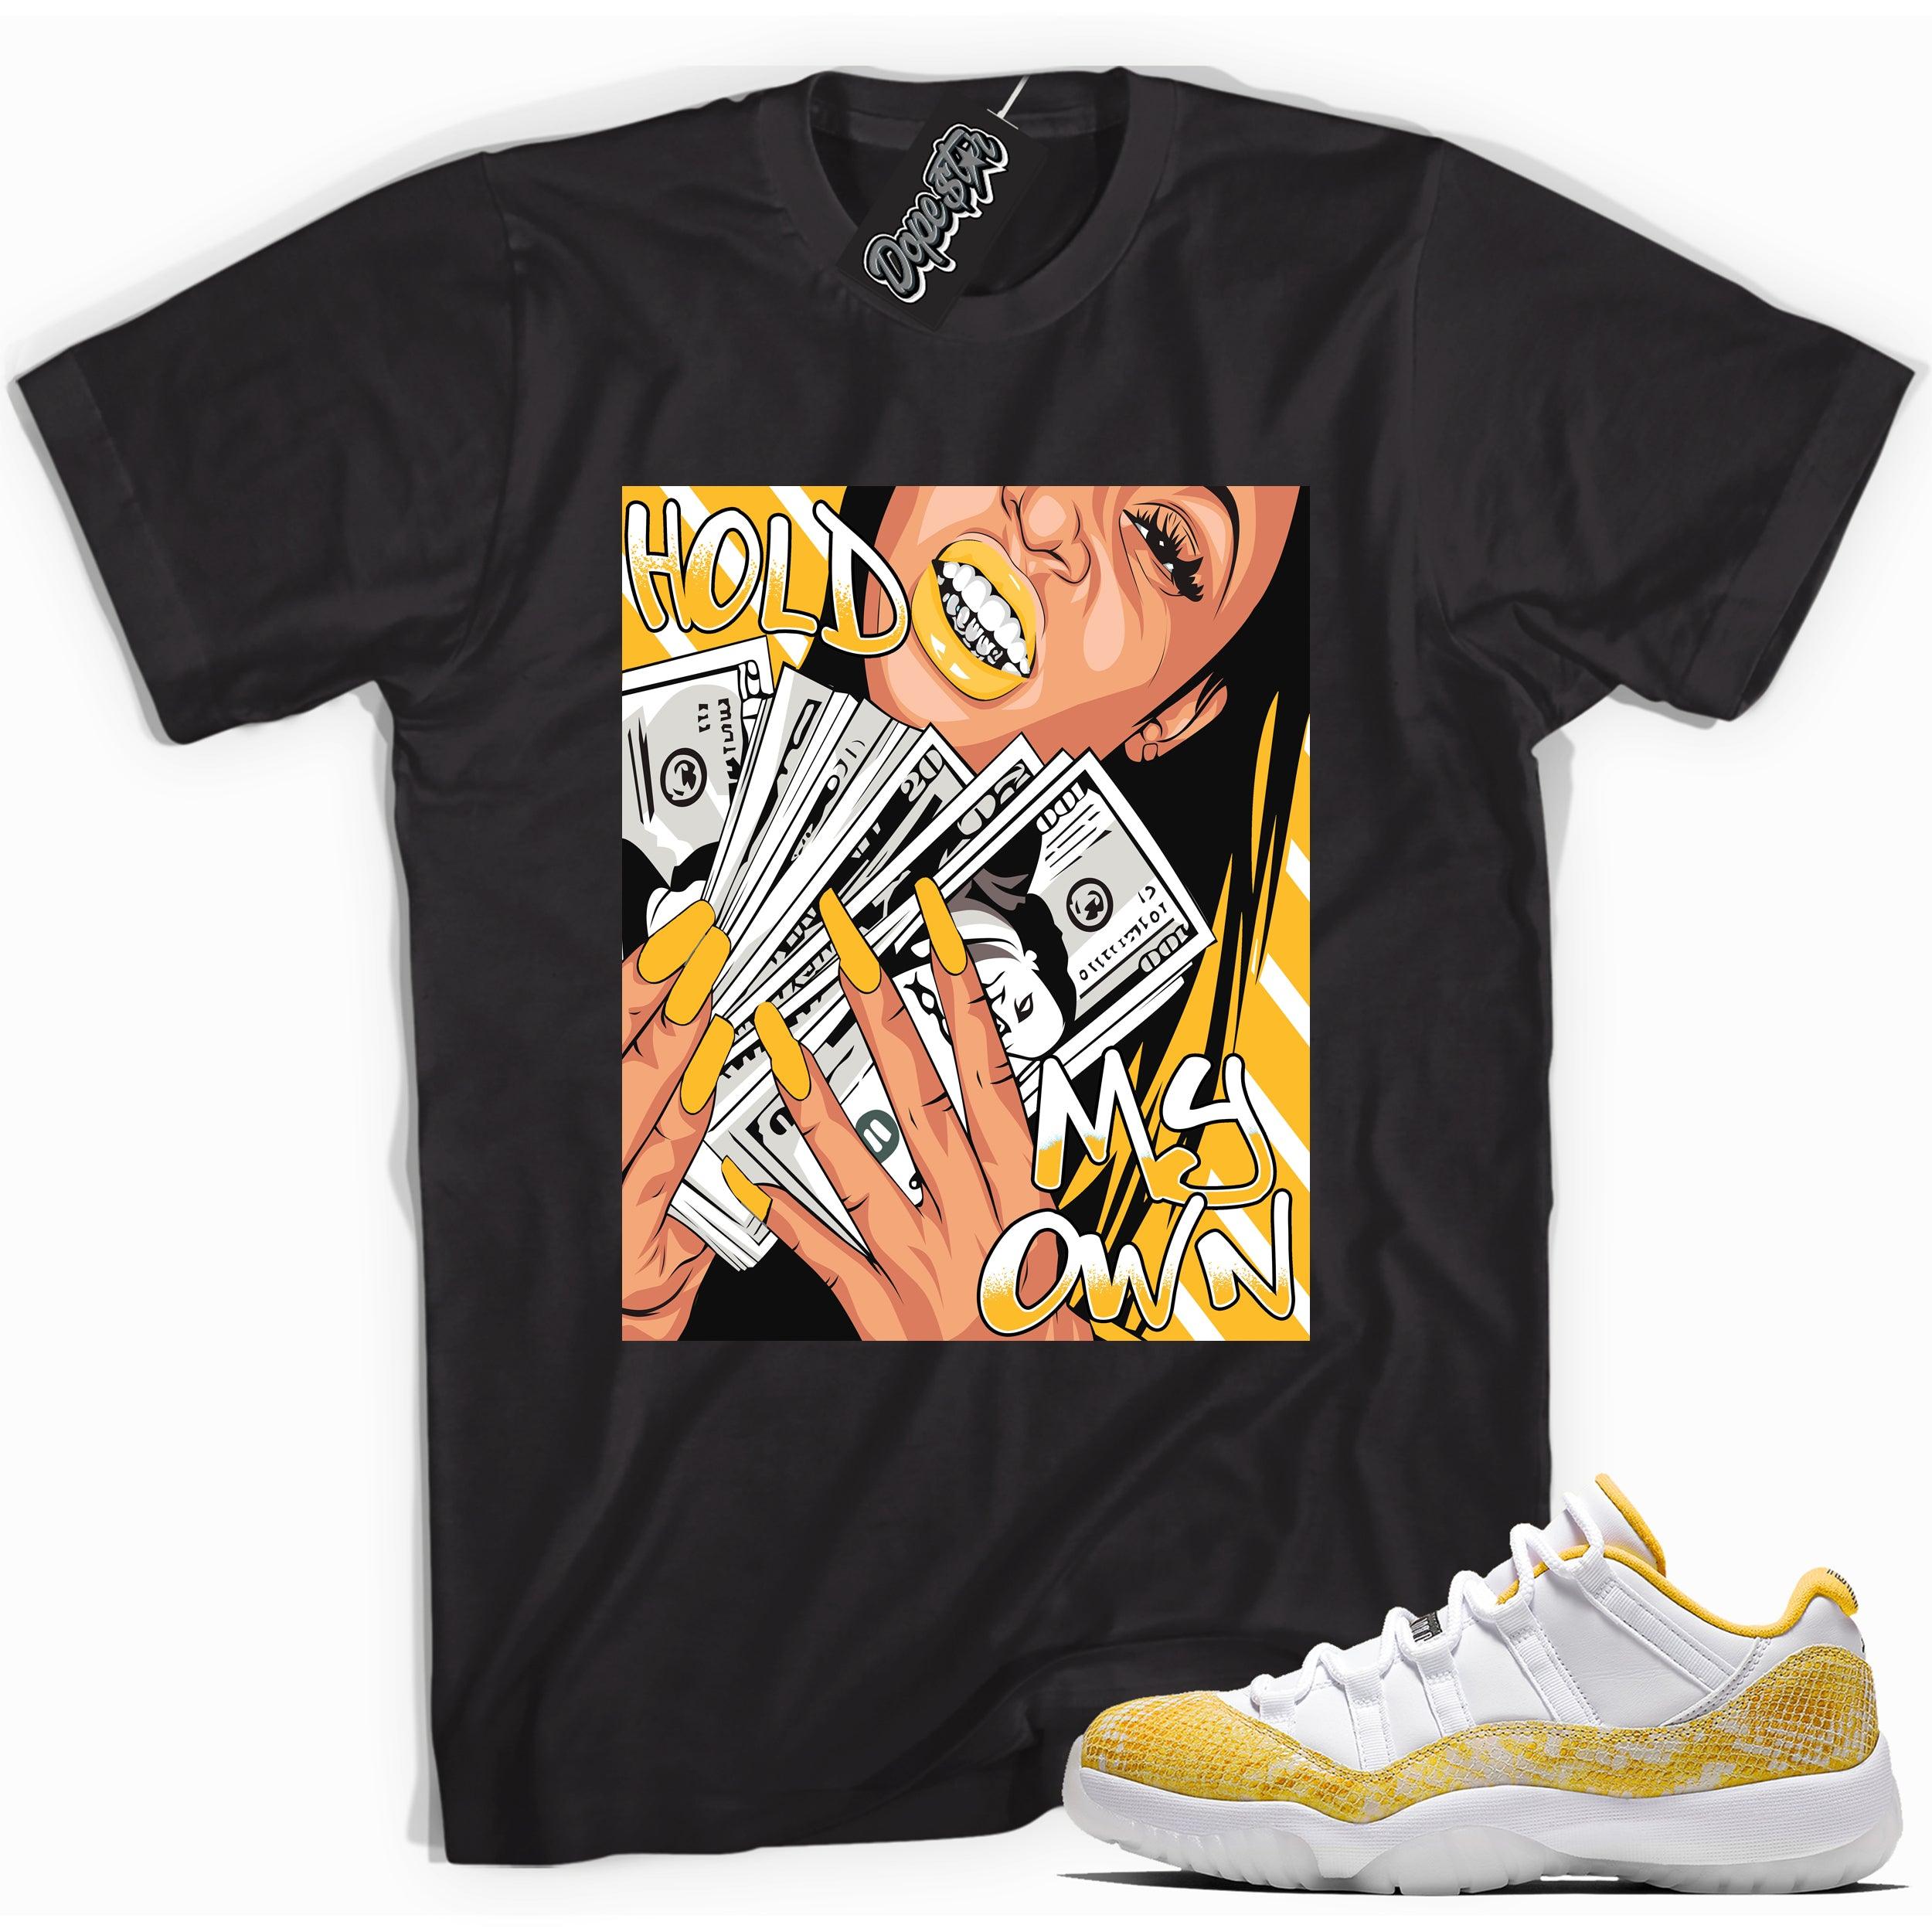 Cool black graphic tee with 'hold my own' print, that perfectly matches  Air Jordan 11 Low Yellow Snakeskin sneakers